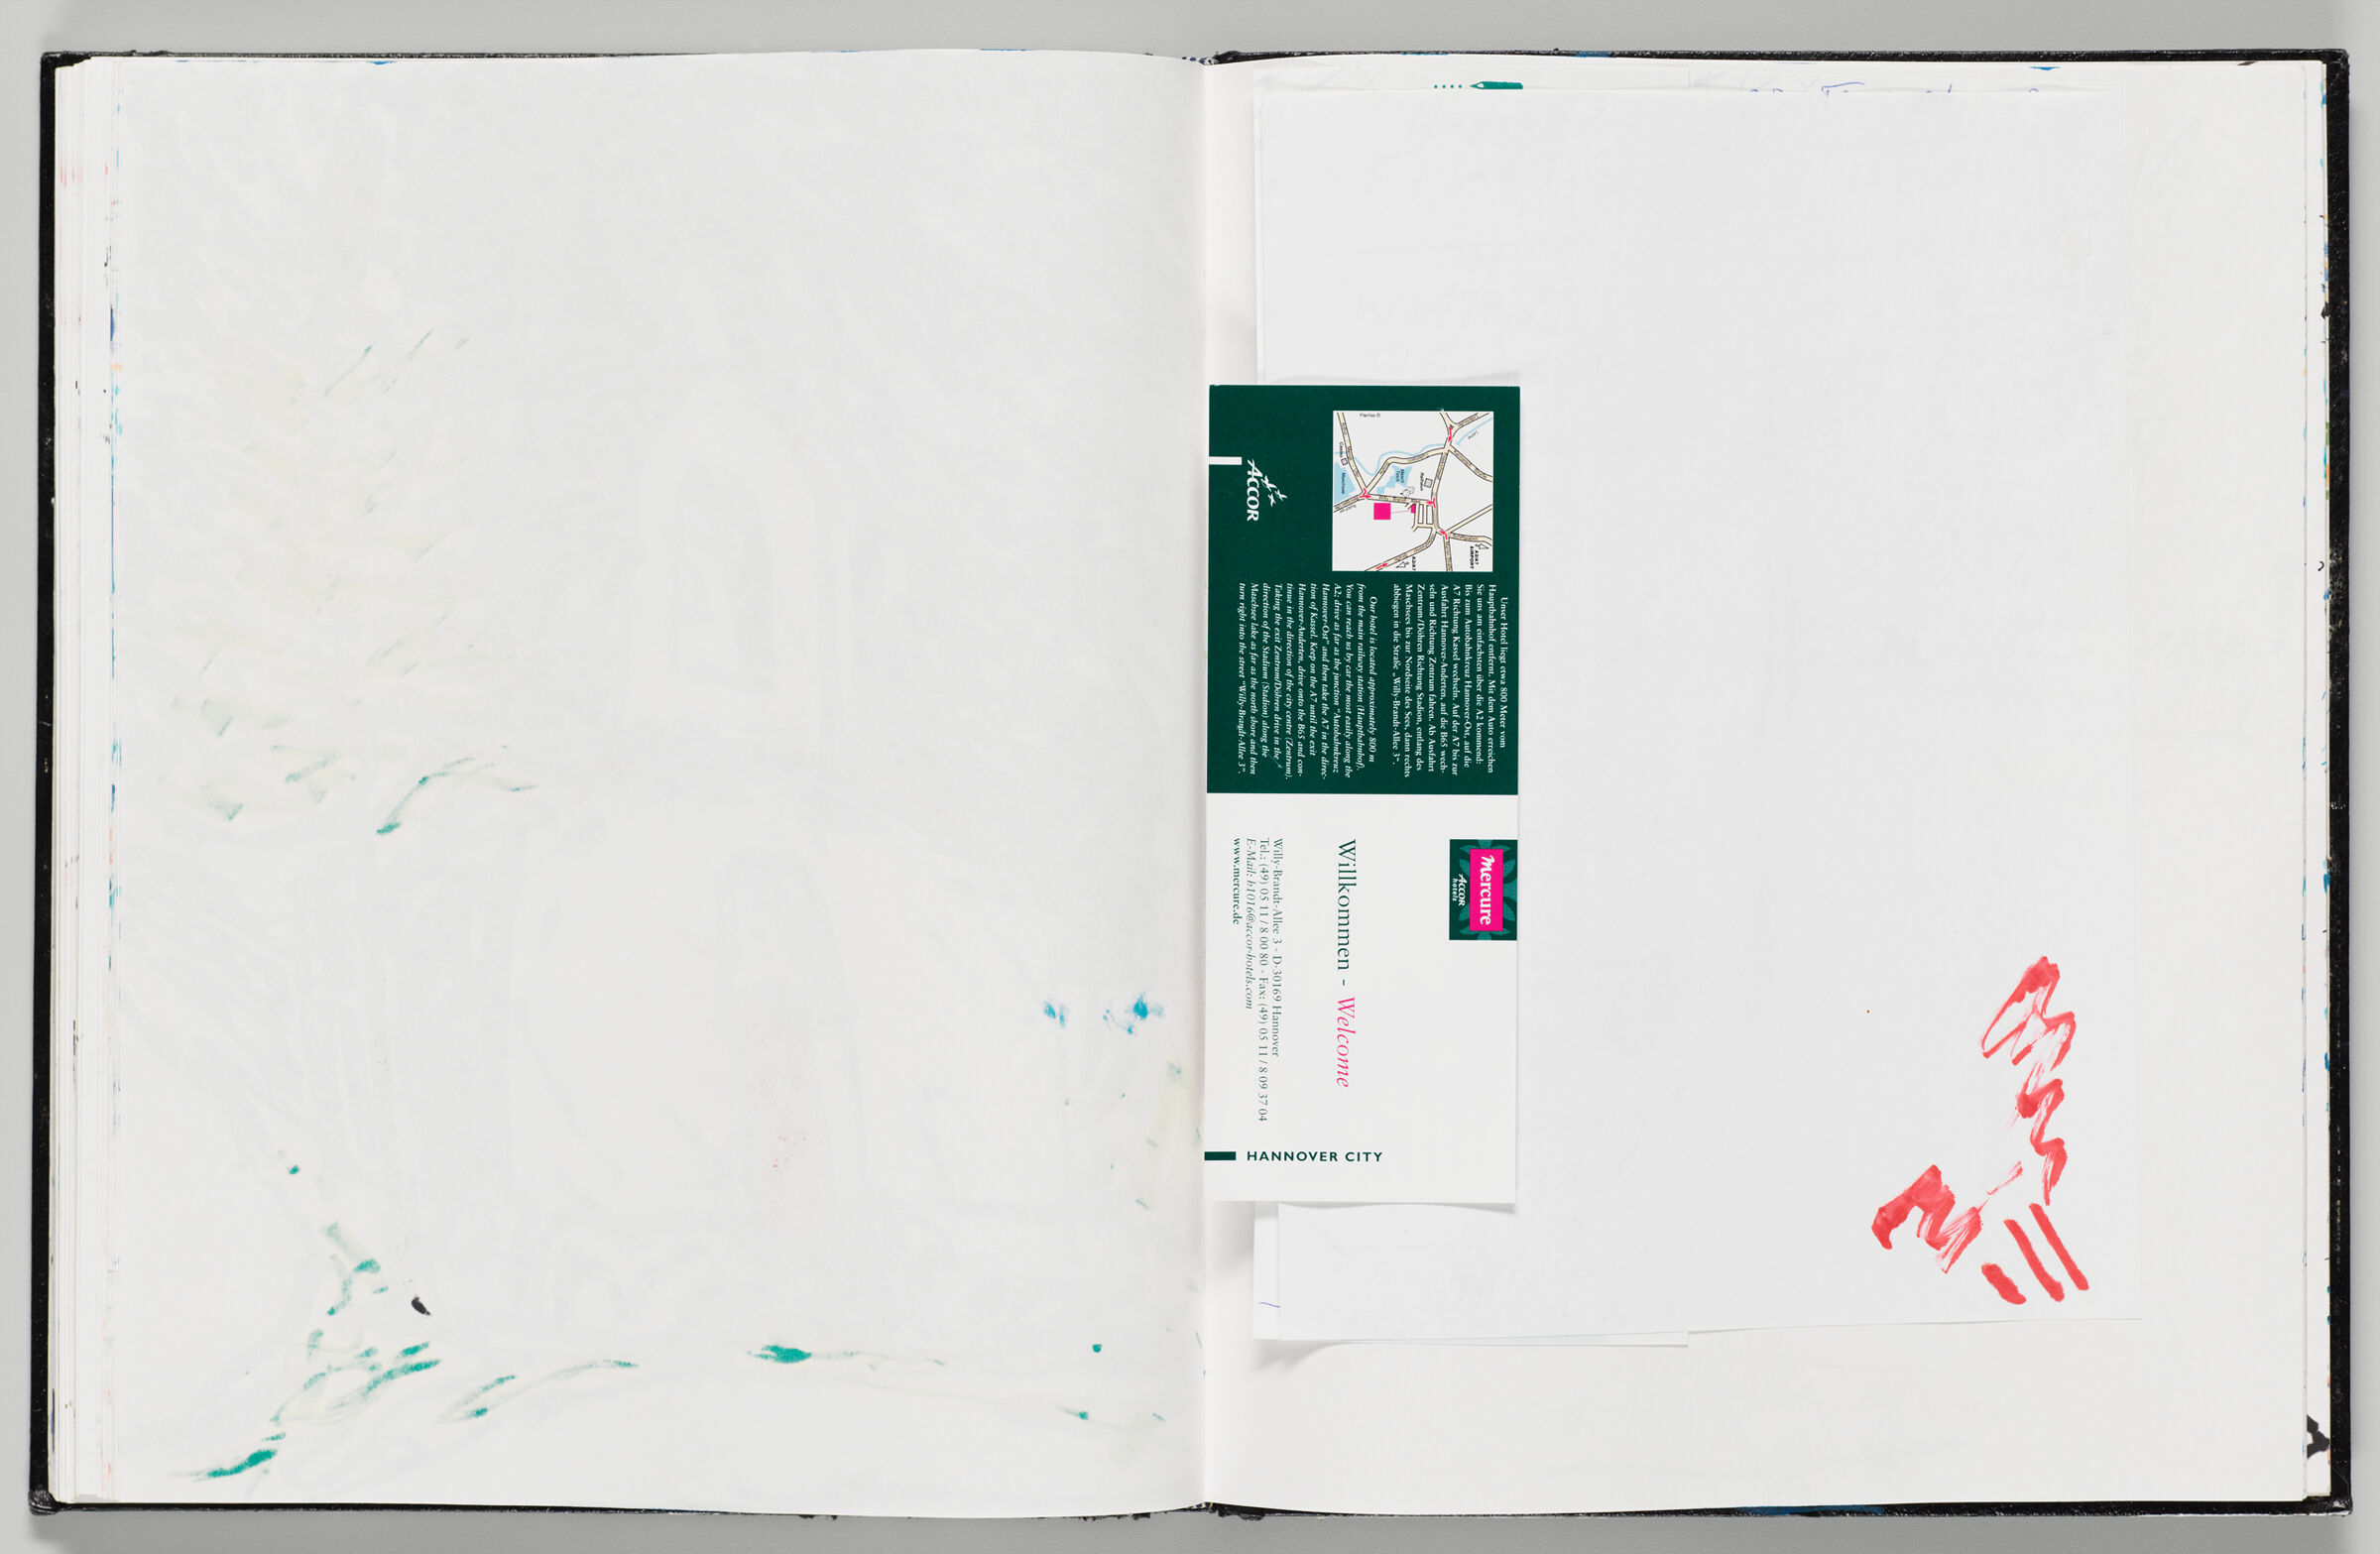 Untitled (Bleed-Through From Previous Page, Left Page); Untitled (Adhered Notes, Right Page)